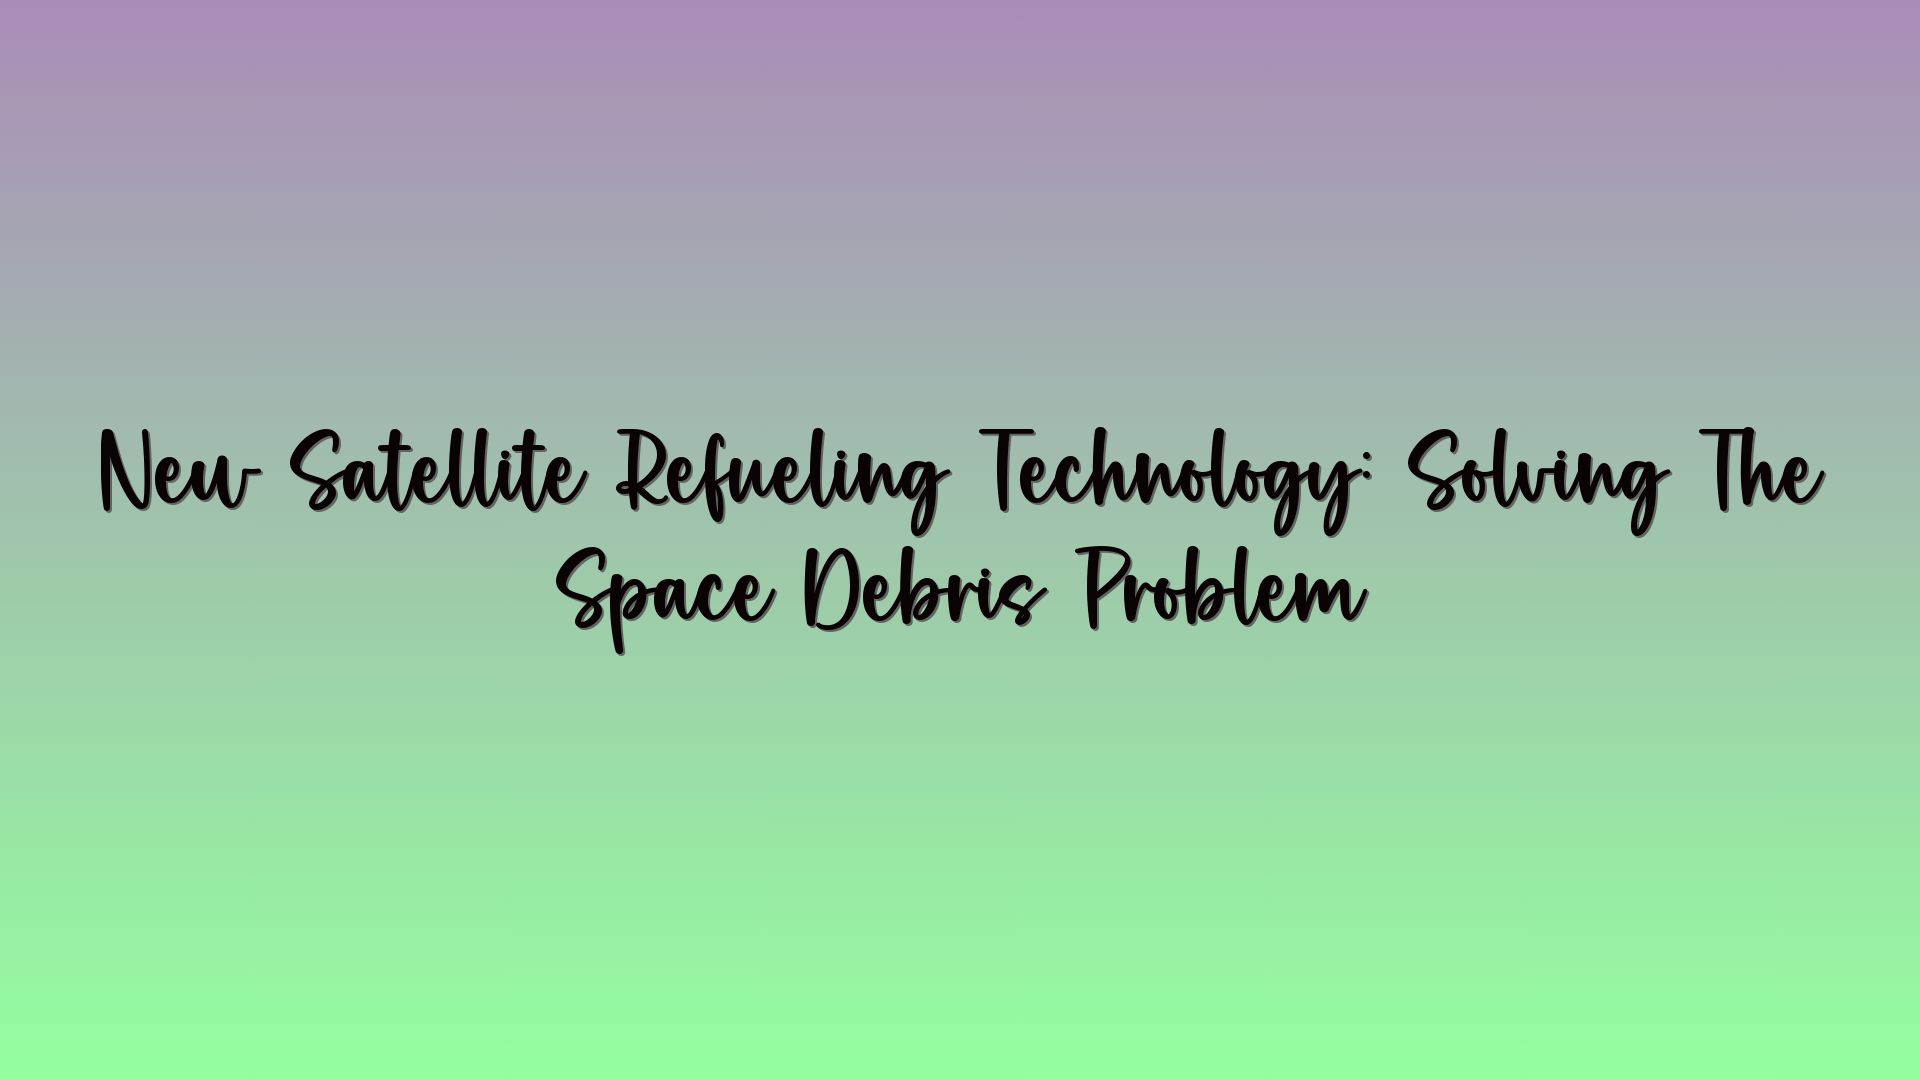 New Satellite Refueling Technology: Solving The Space Debris Problem